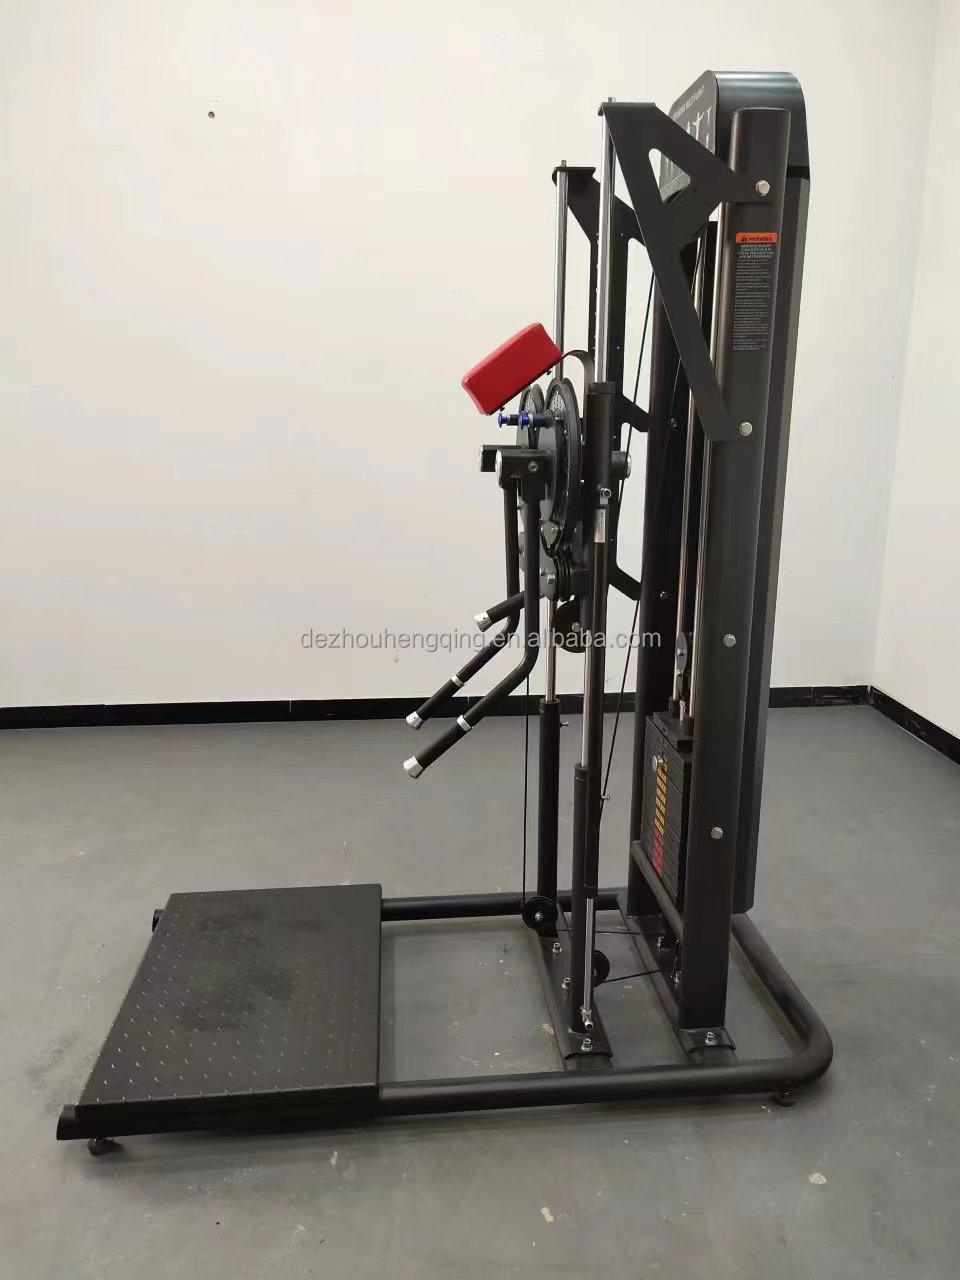 2022 Hot Sales Cheaper Gym Home Sports Equipment Standing Multi Flight Trainer Lateral Raise Machine